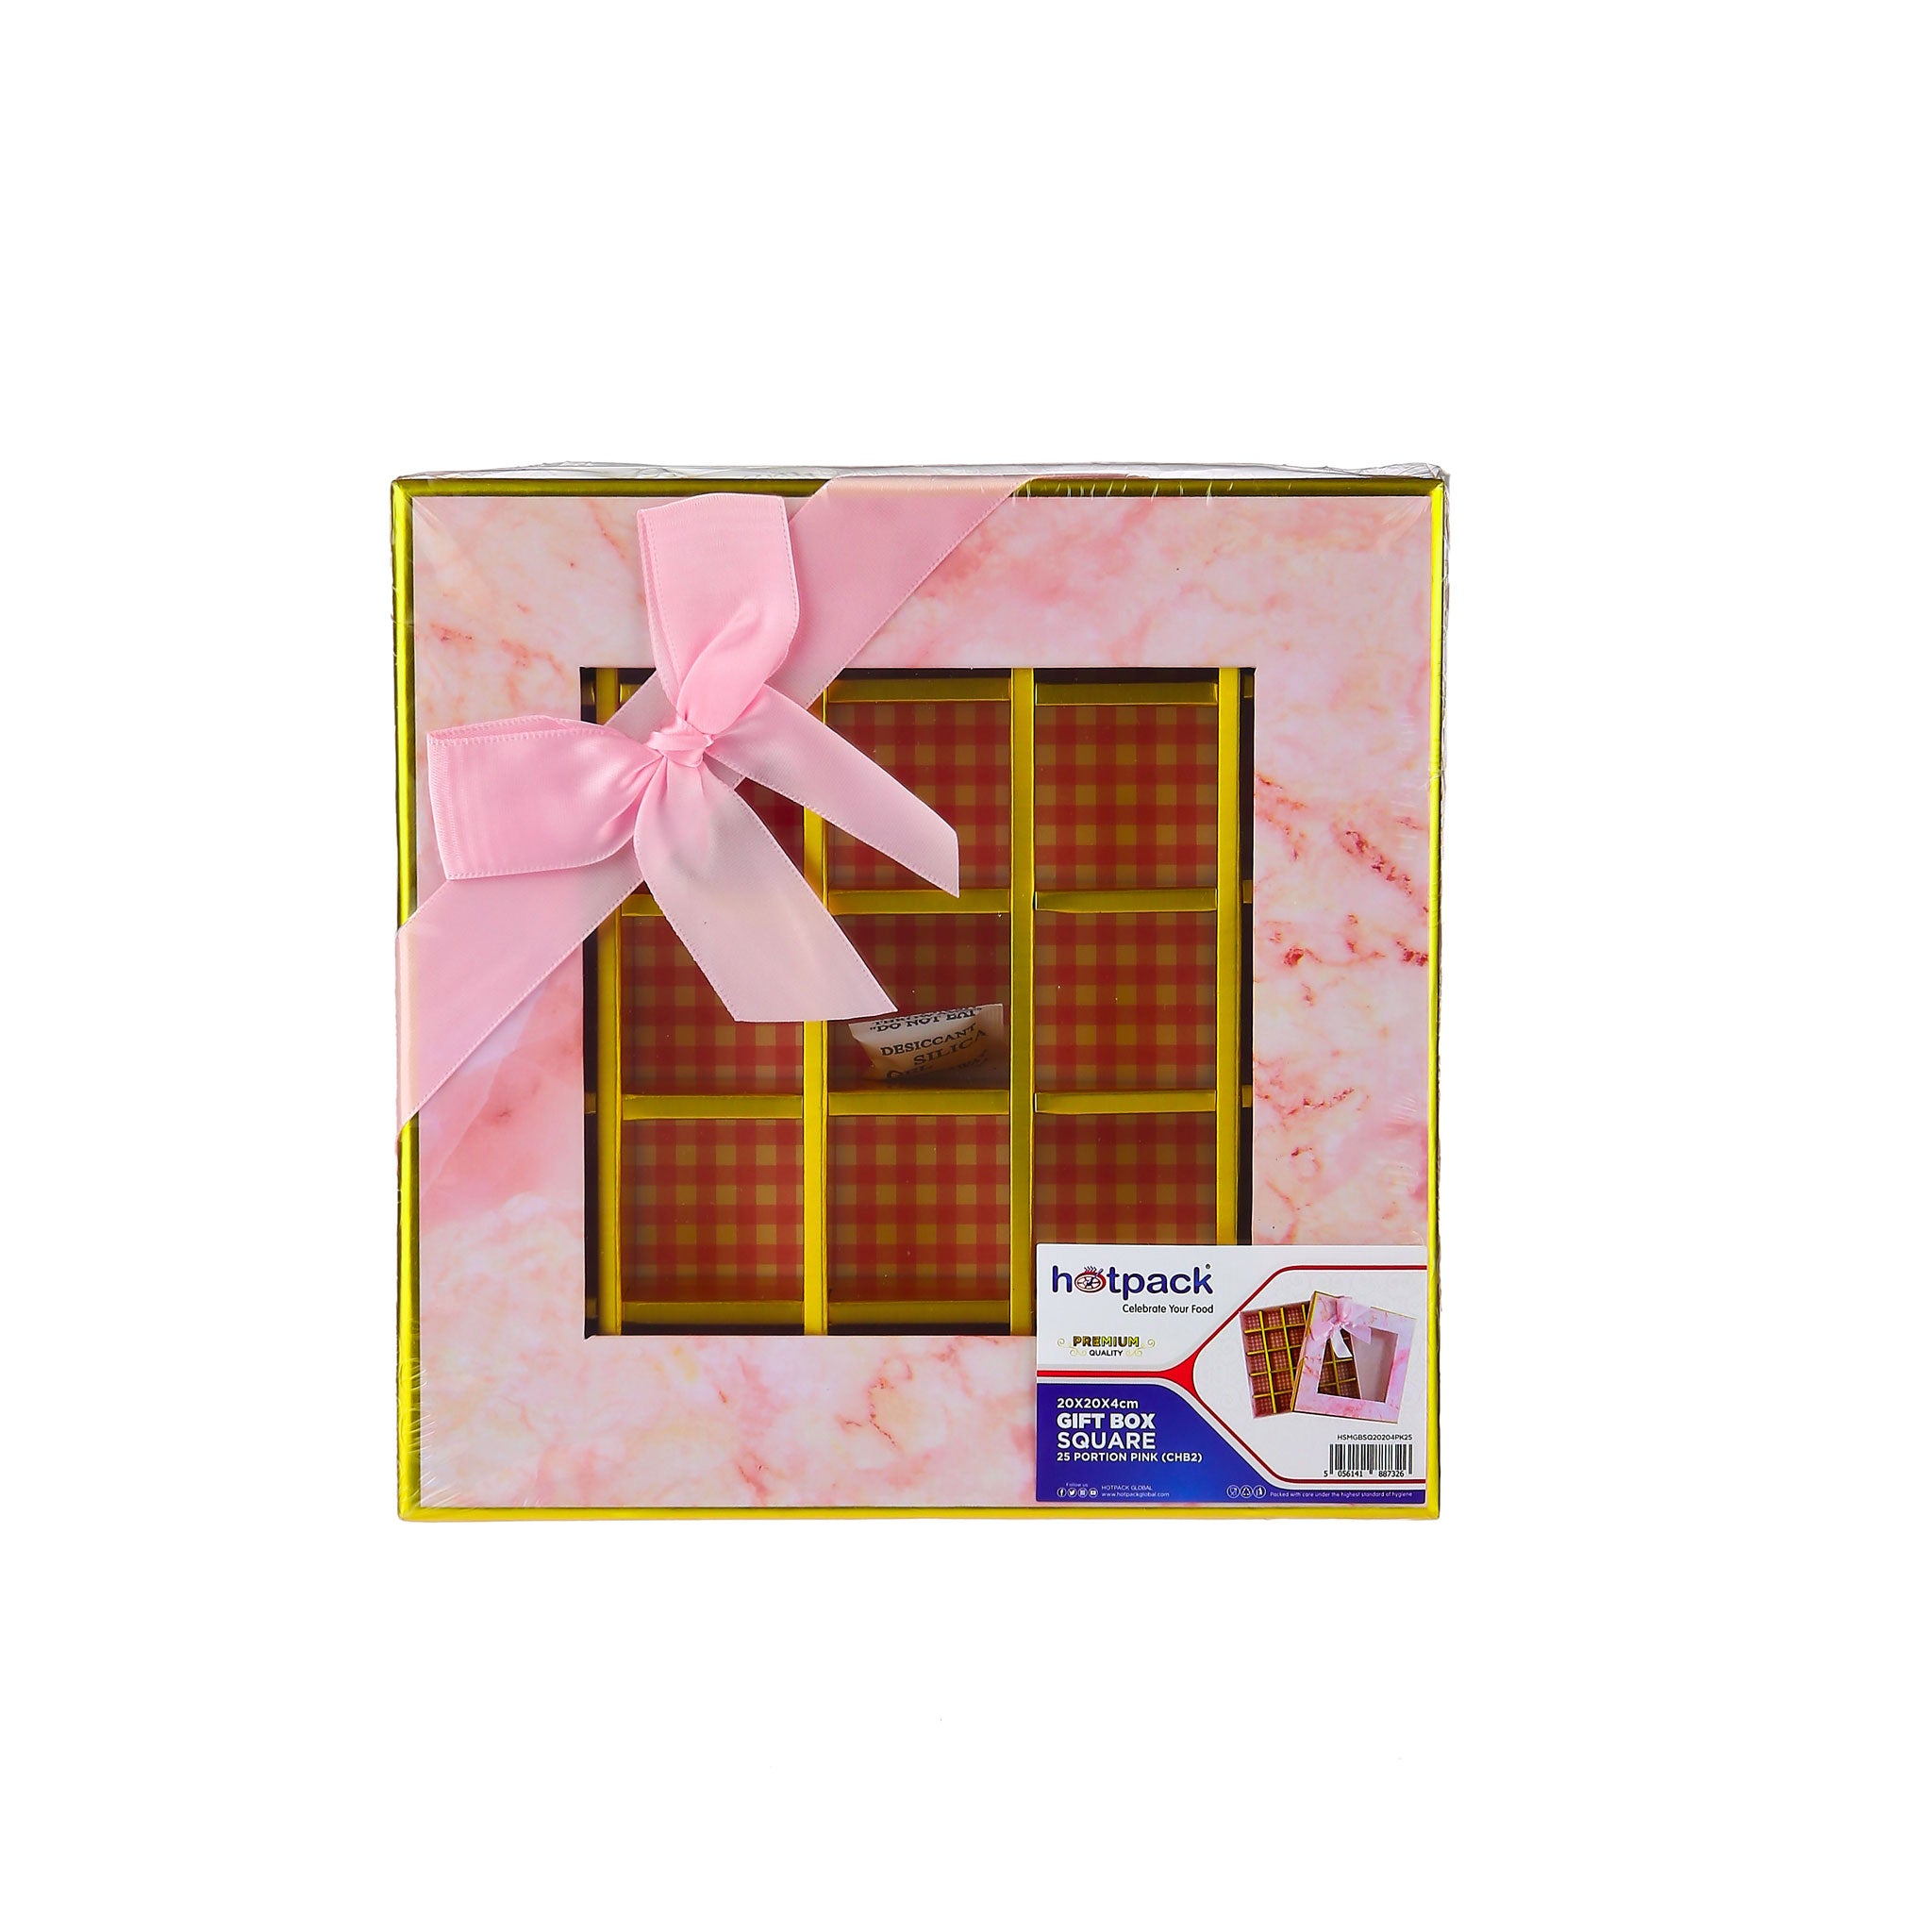 Square Chocolate Gift Box Shape 16 Division - 1 Piece - Hotpack Global